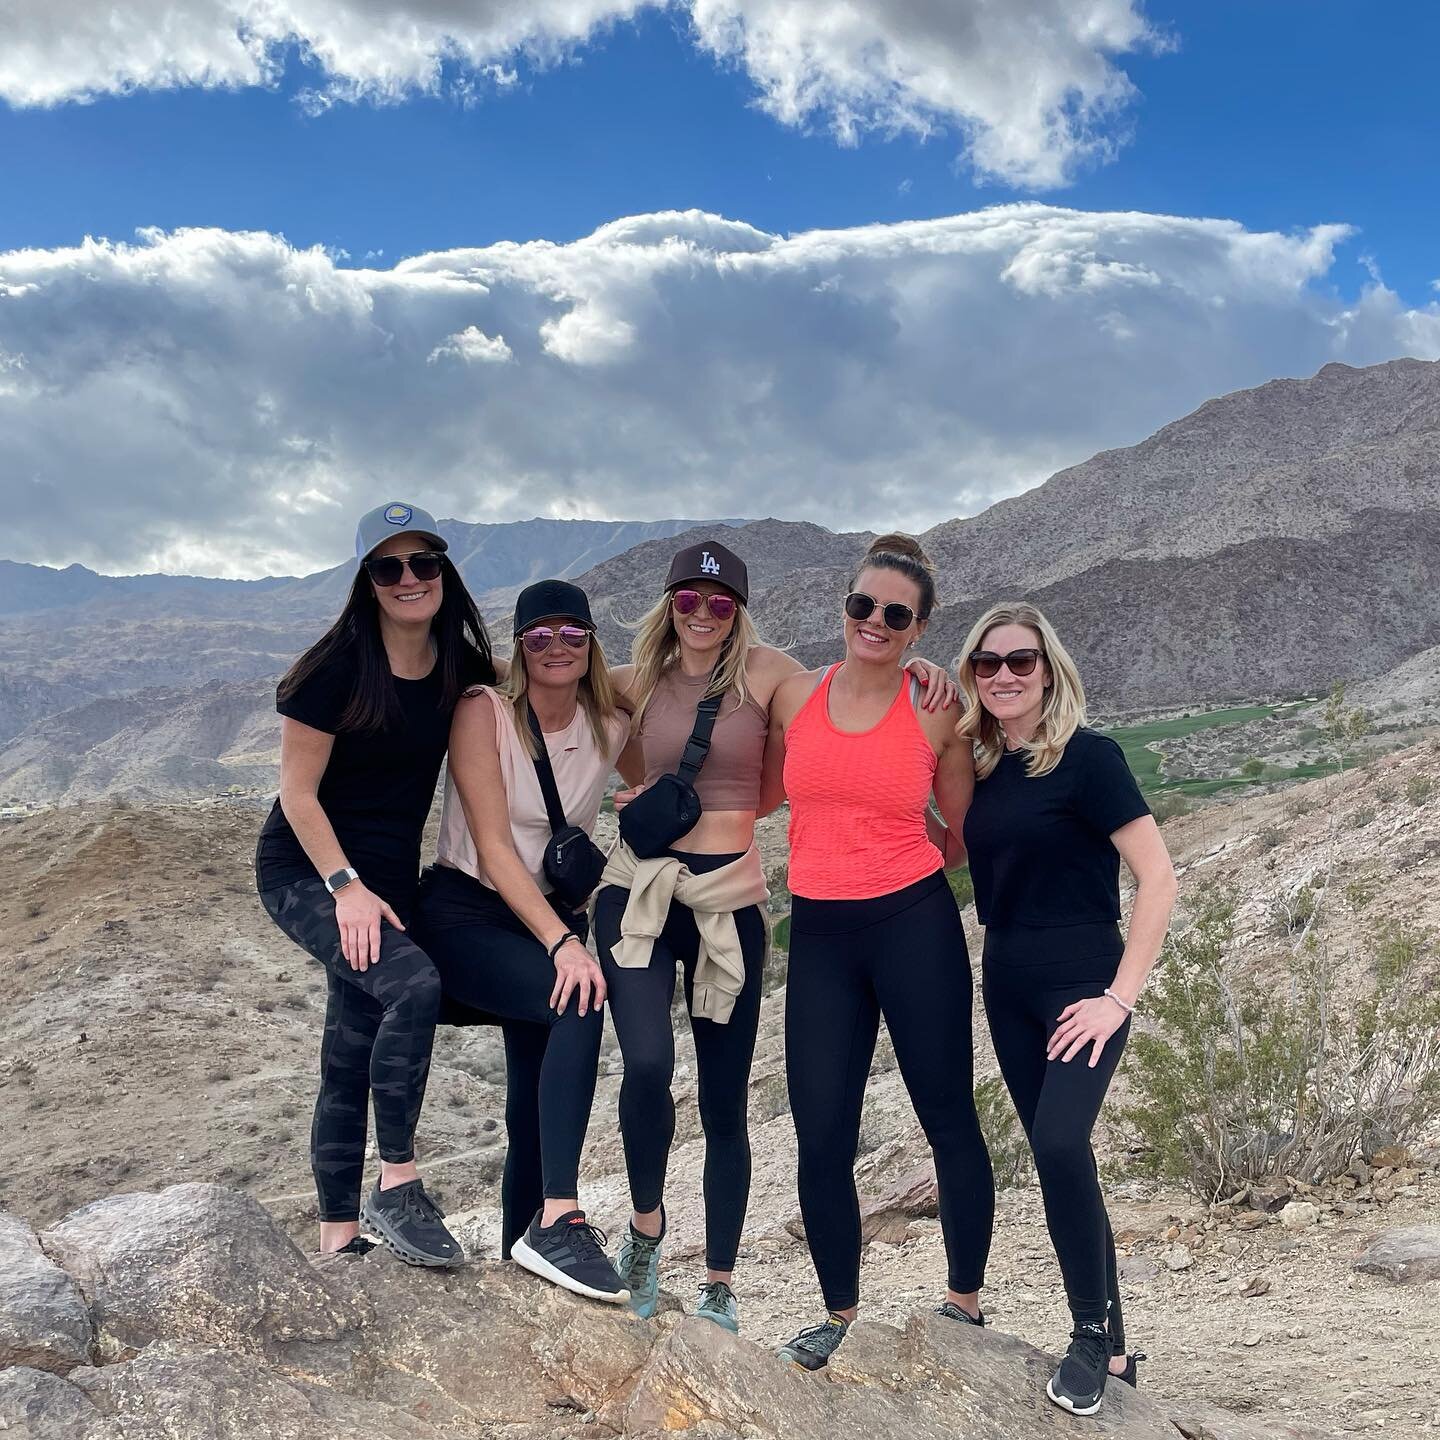 Probably my favorite thing to do on a girls trip is hike! I love exploring new places and appreciate every minute of my body being able to do it. 

This trip, we decided to hike The Cross Trail Loop. It&rsquo;s a fairly steep, up hill climb to the Cr